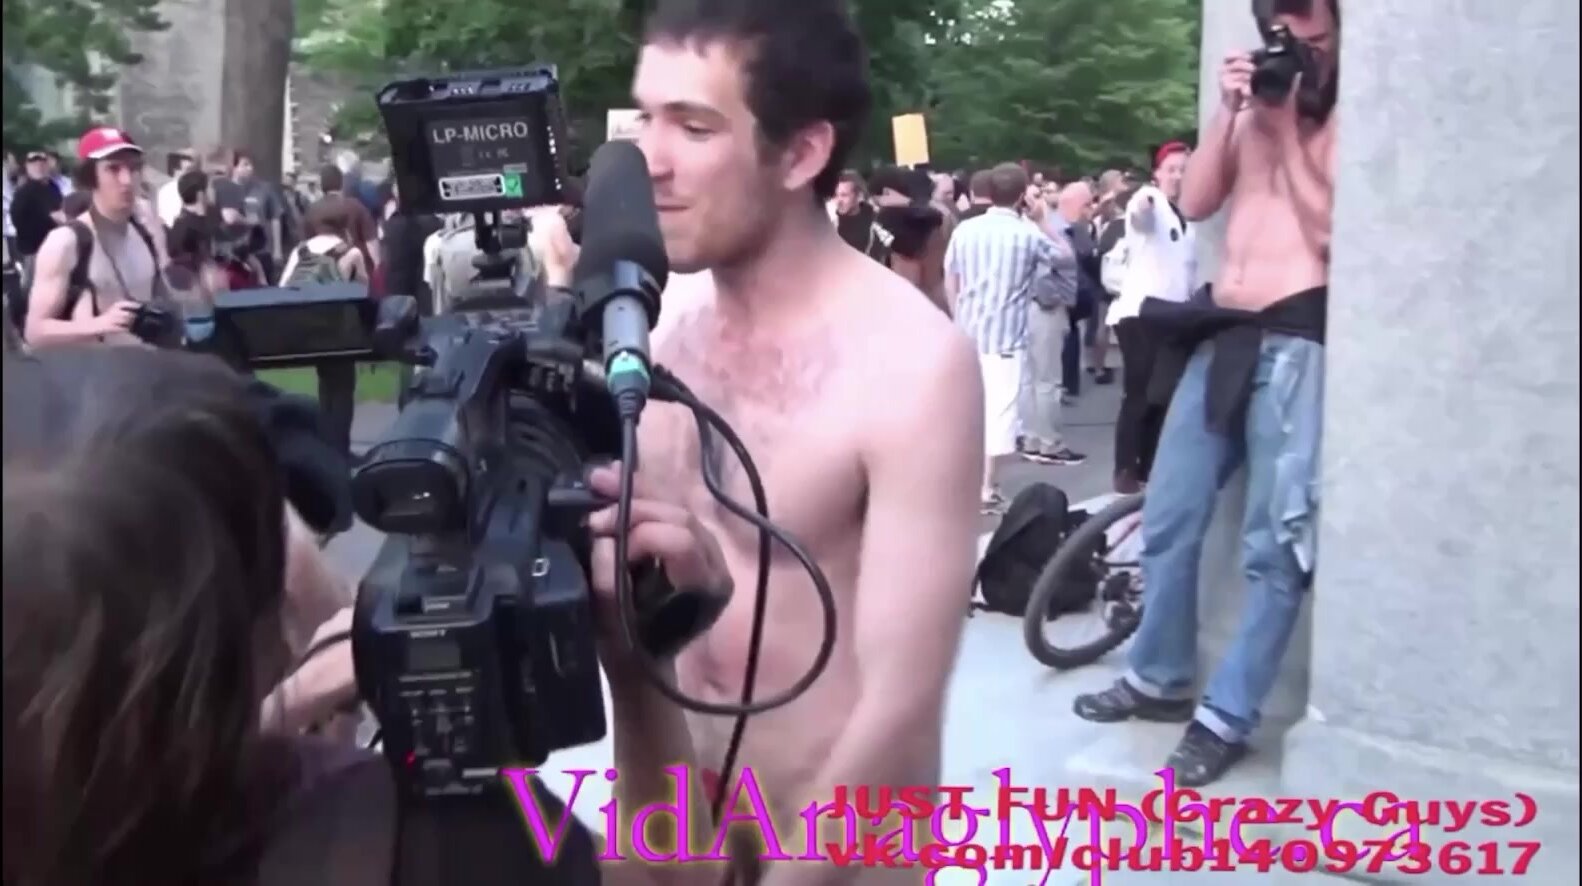 Naked foreign guys naked at a public rally